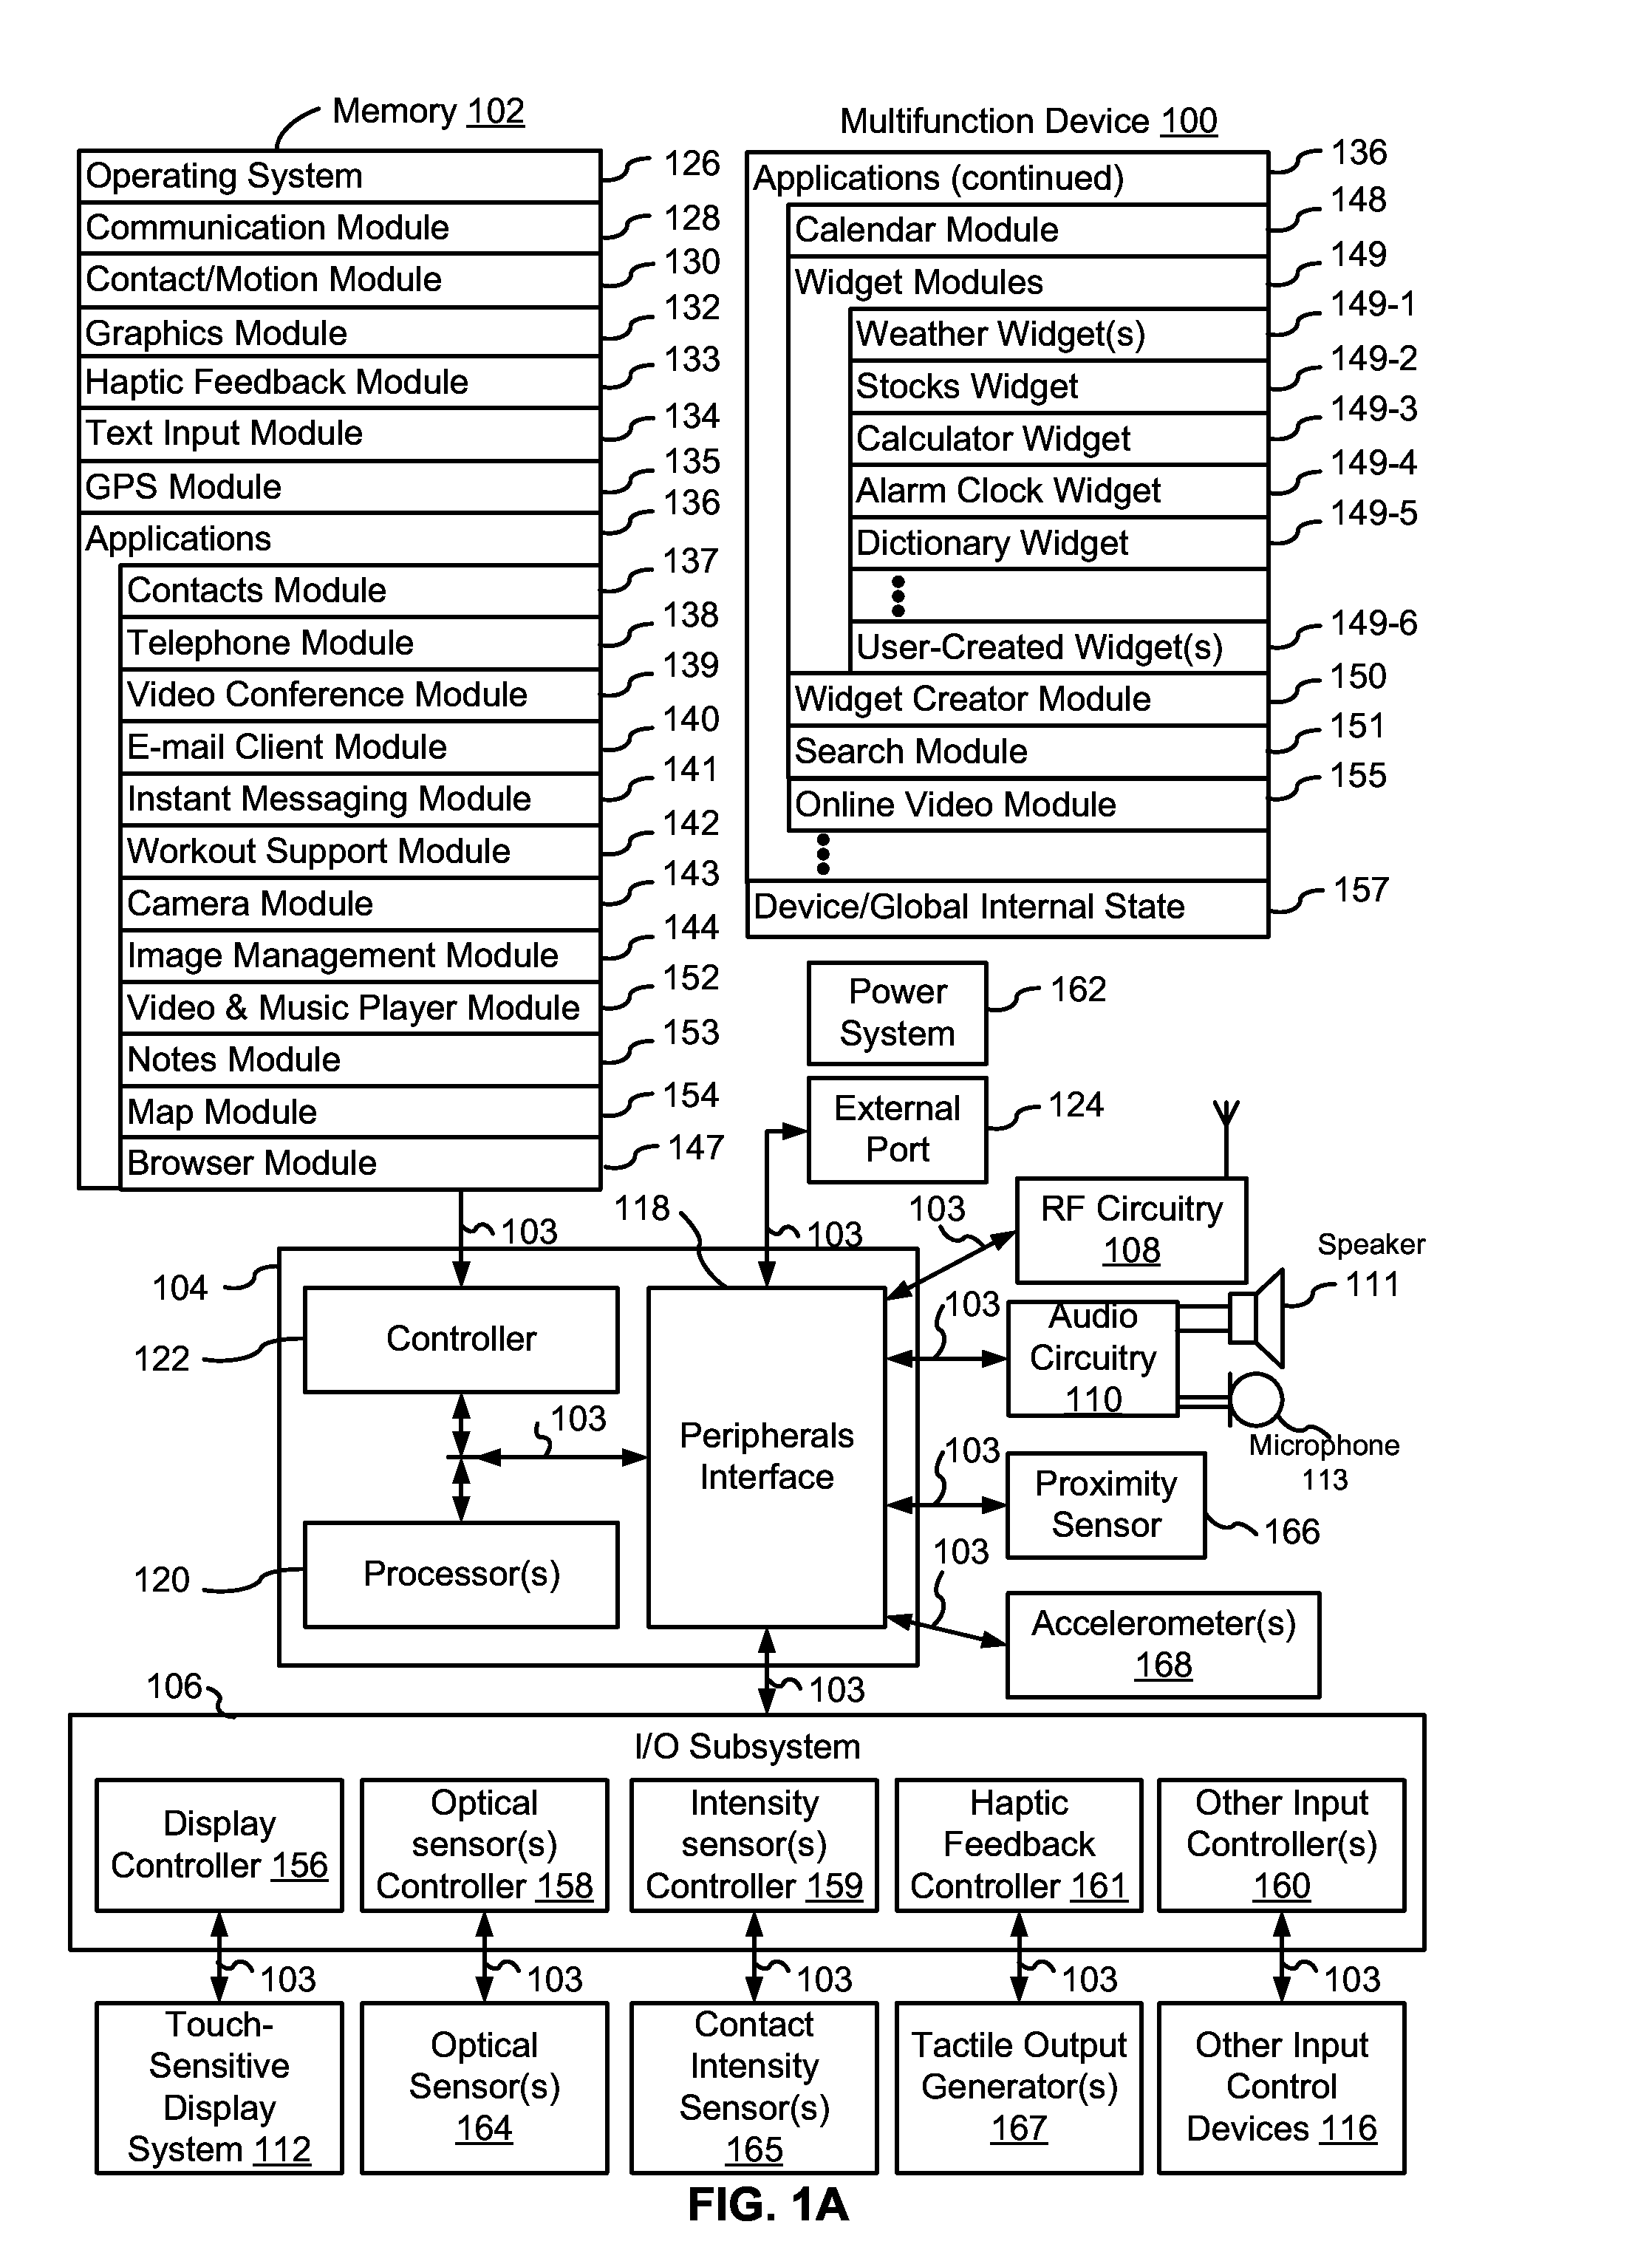 Column interface for navigating in a user interface